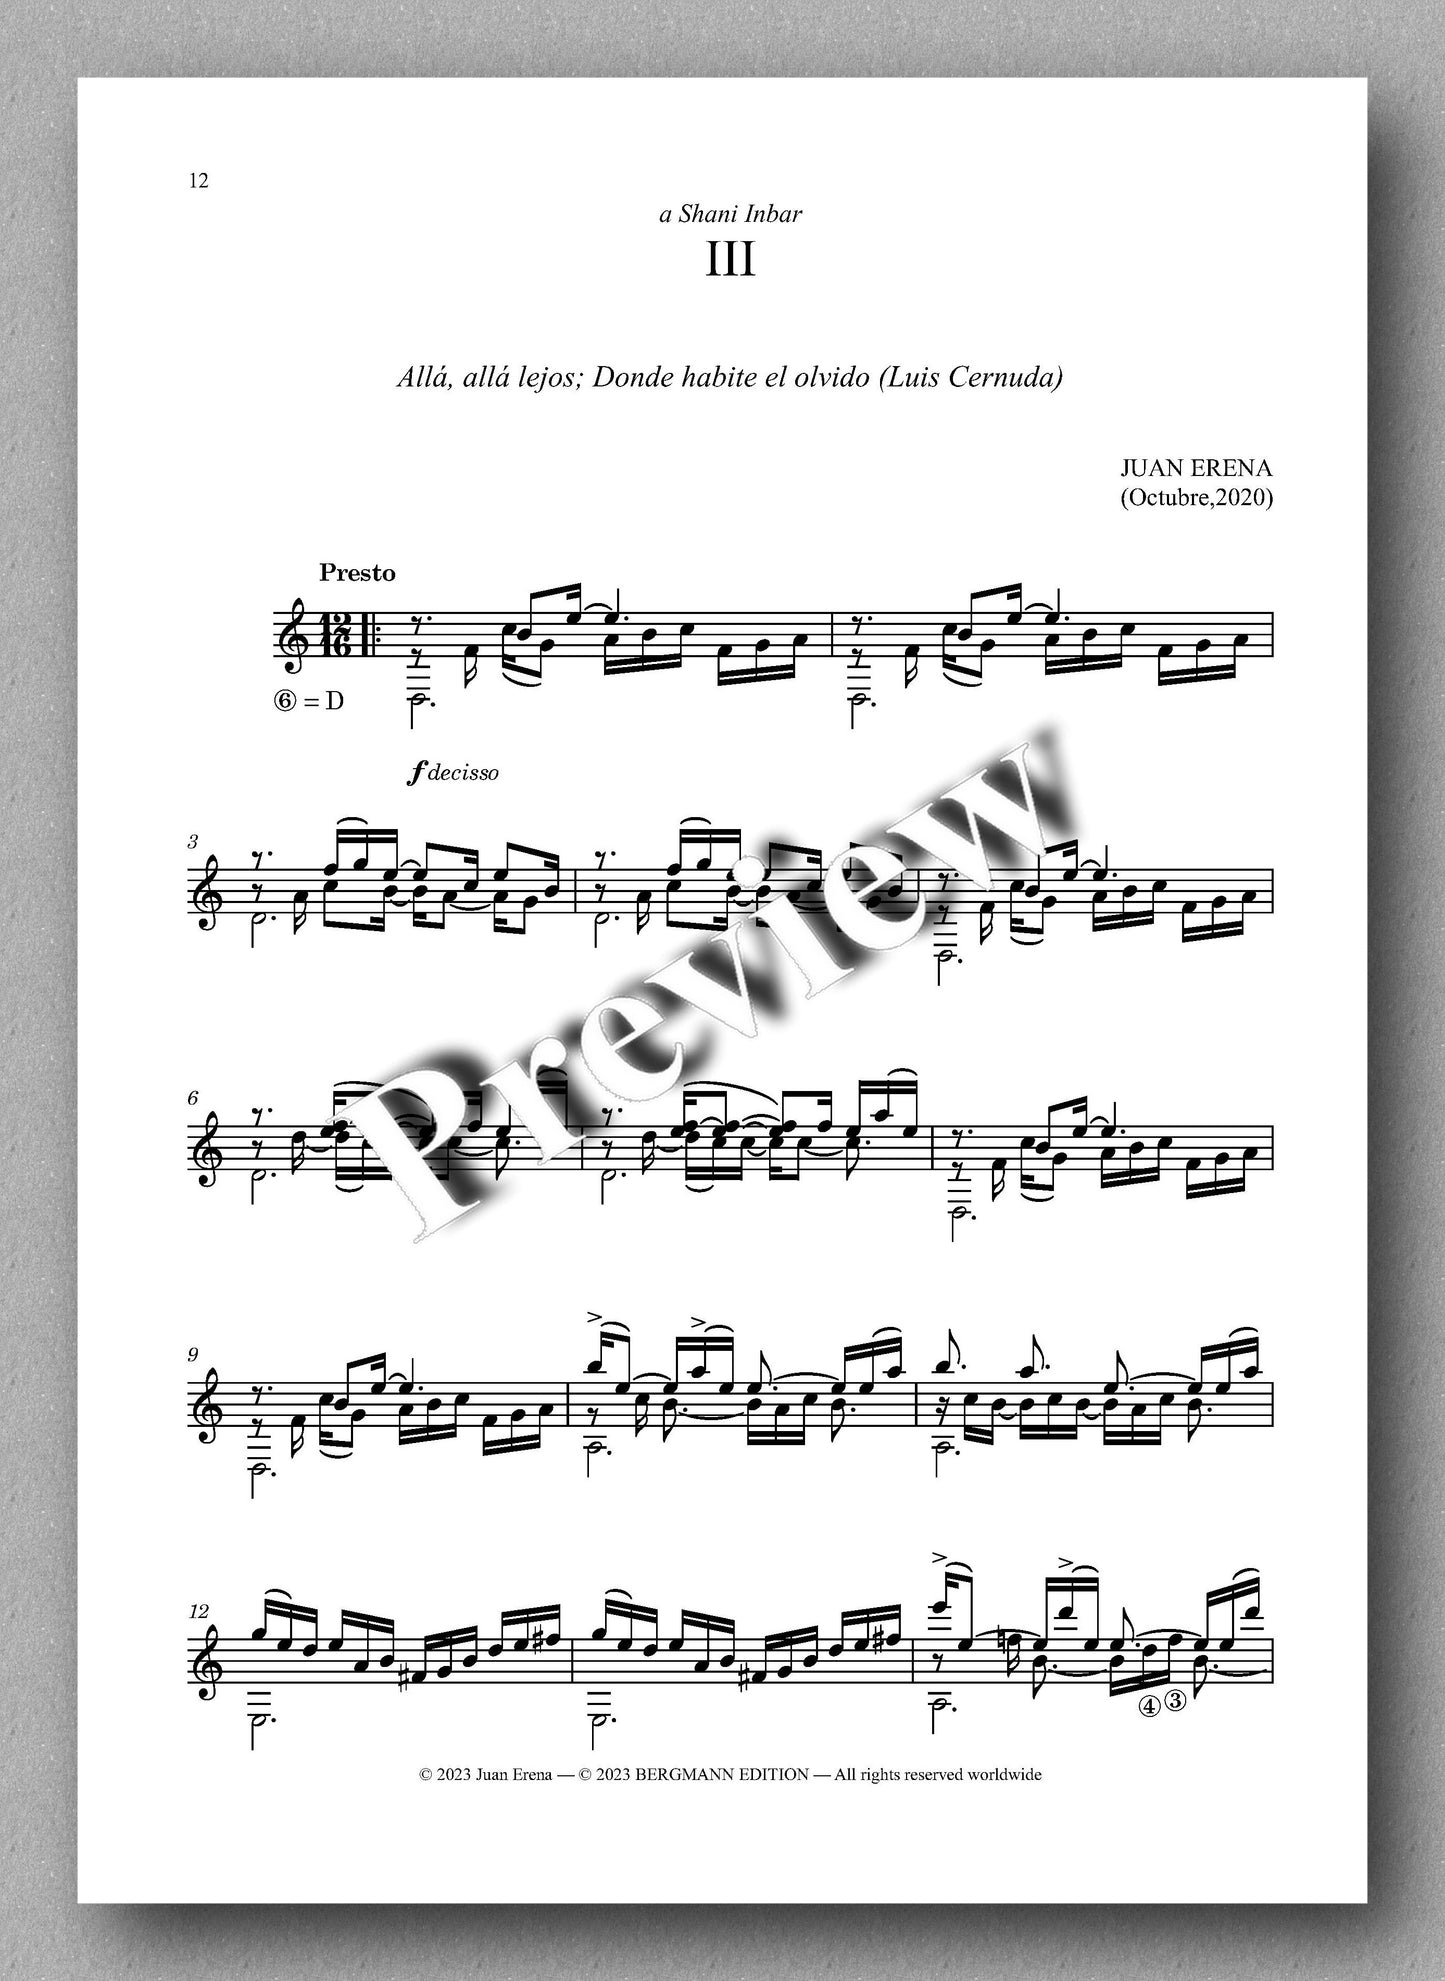 Juan Erena, Sonata V, "Poemas y Olvidos" (Poems and Oblivions) - preview of the music score 3